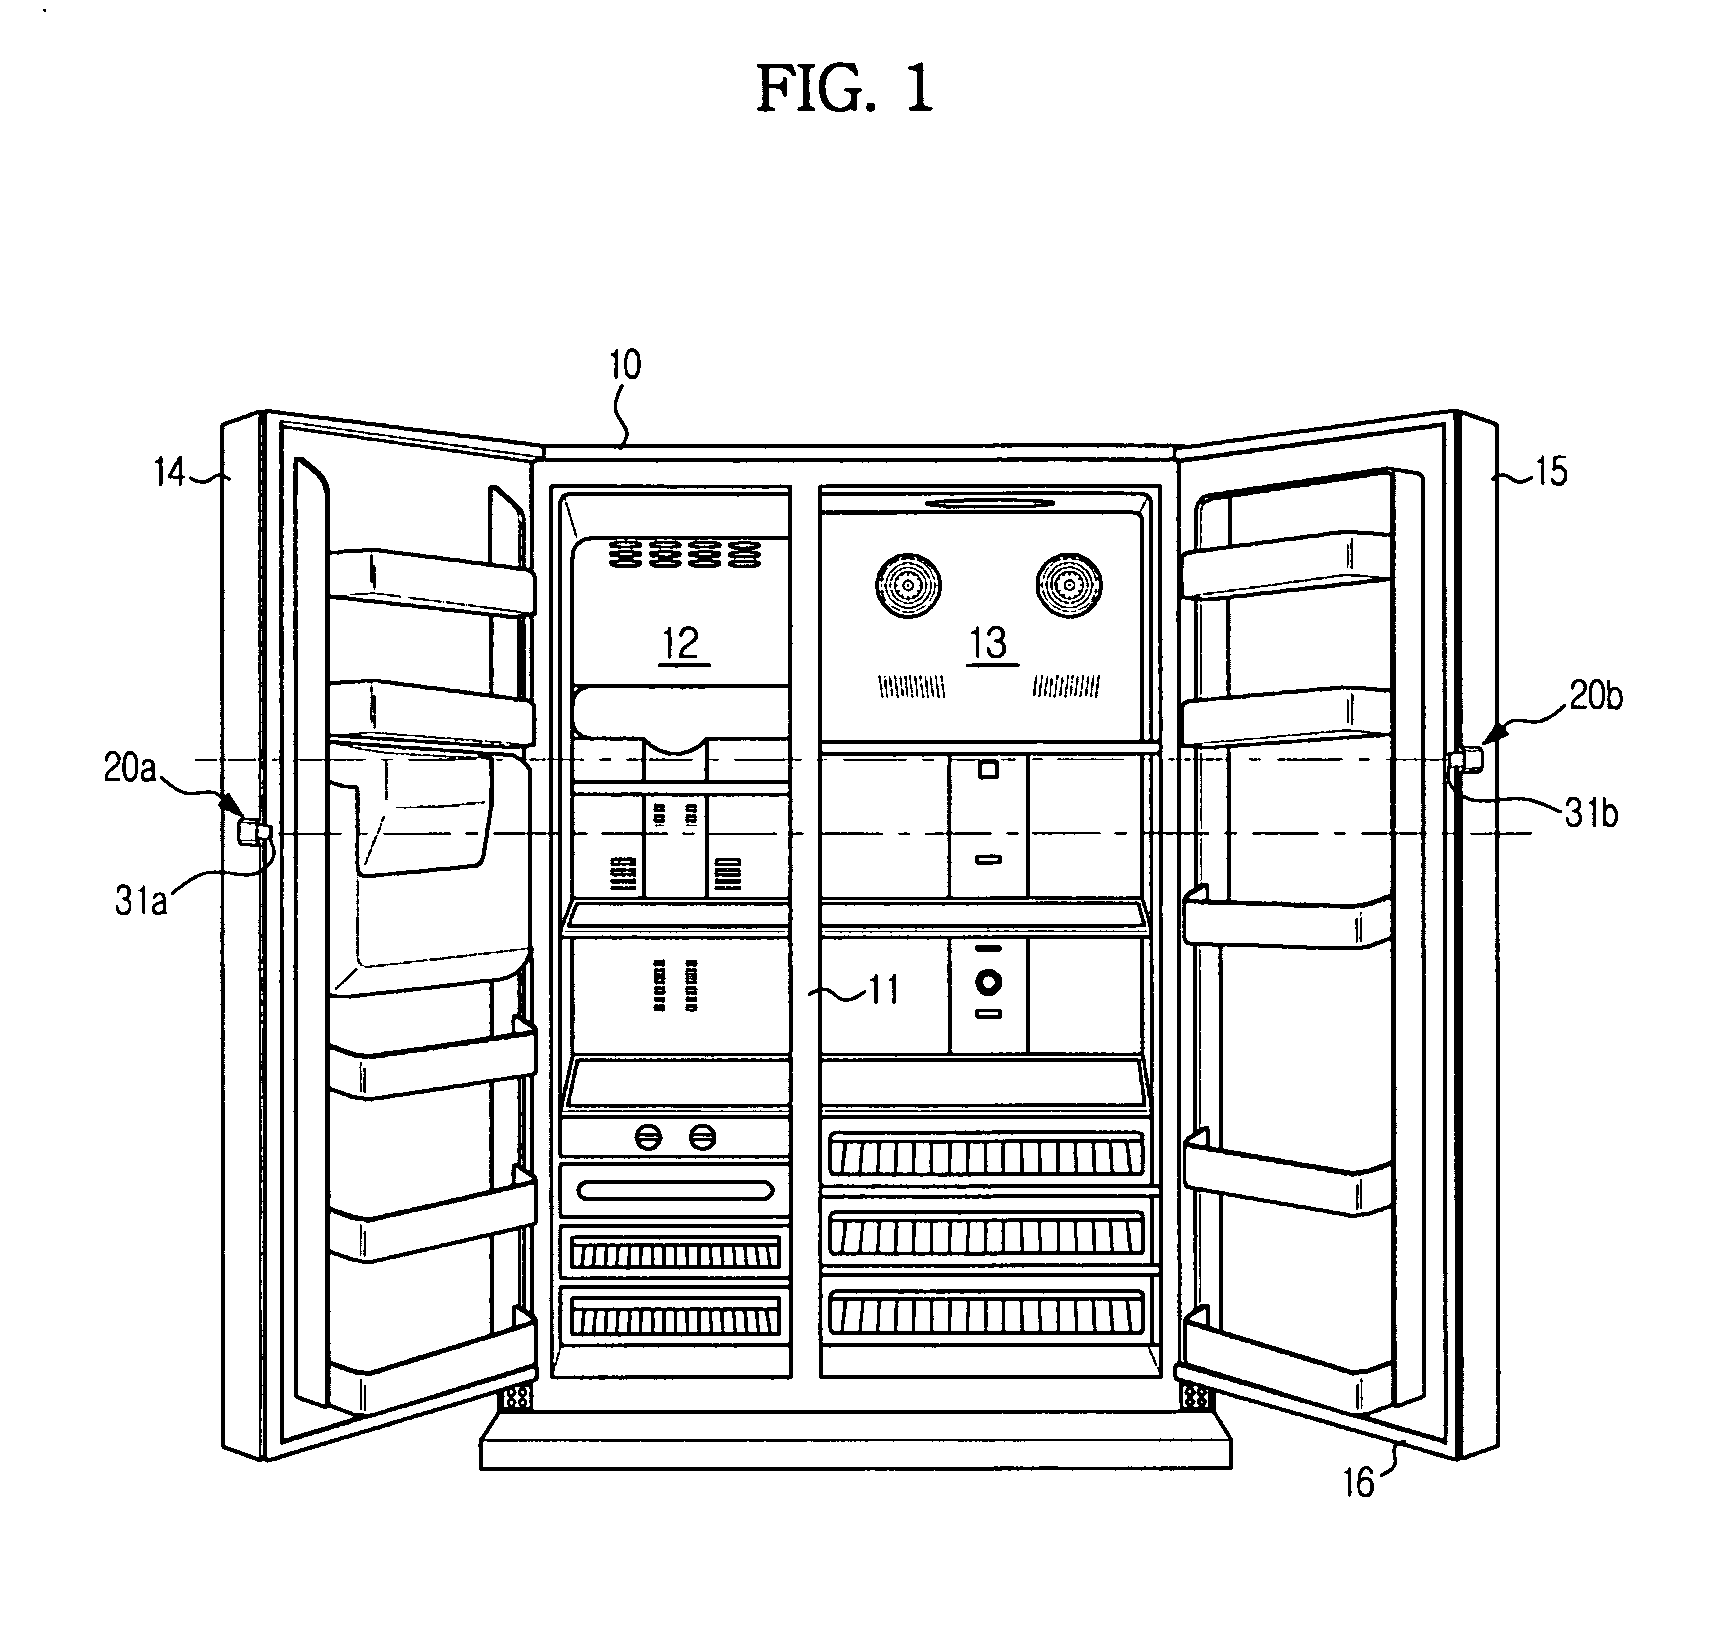 Opening device for refrigerator